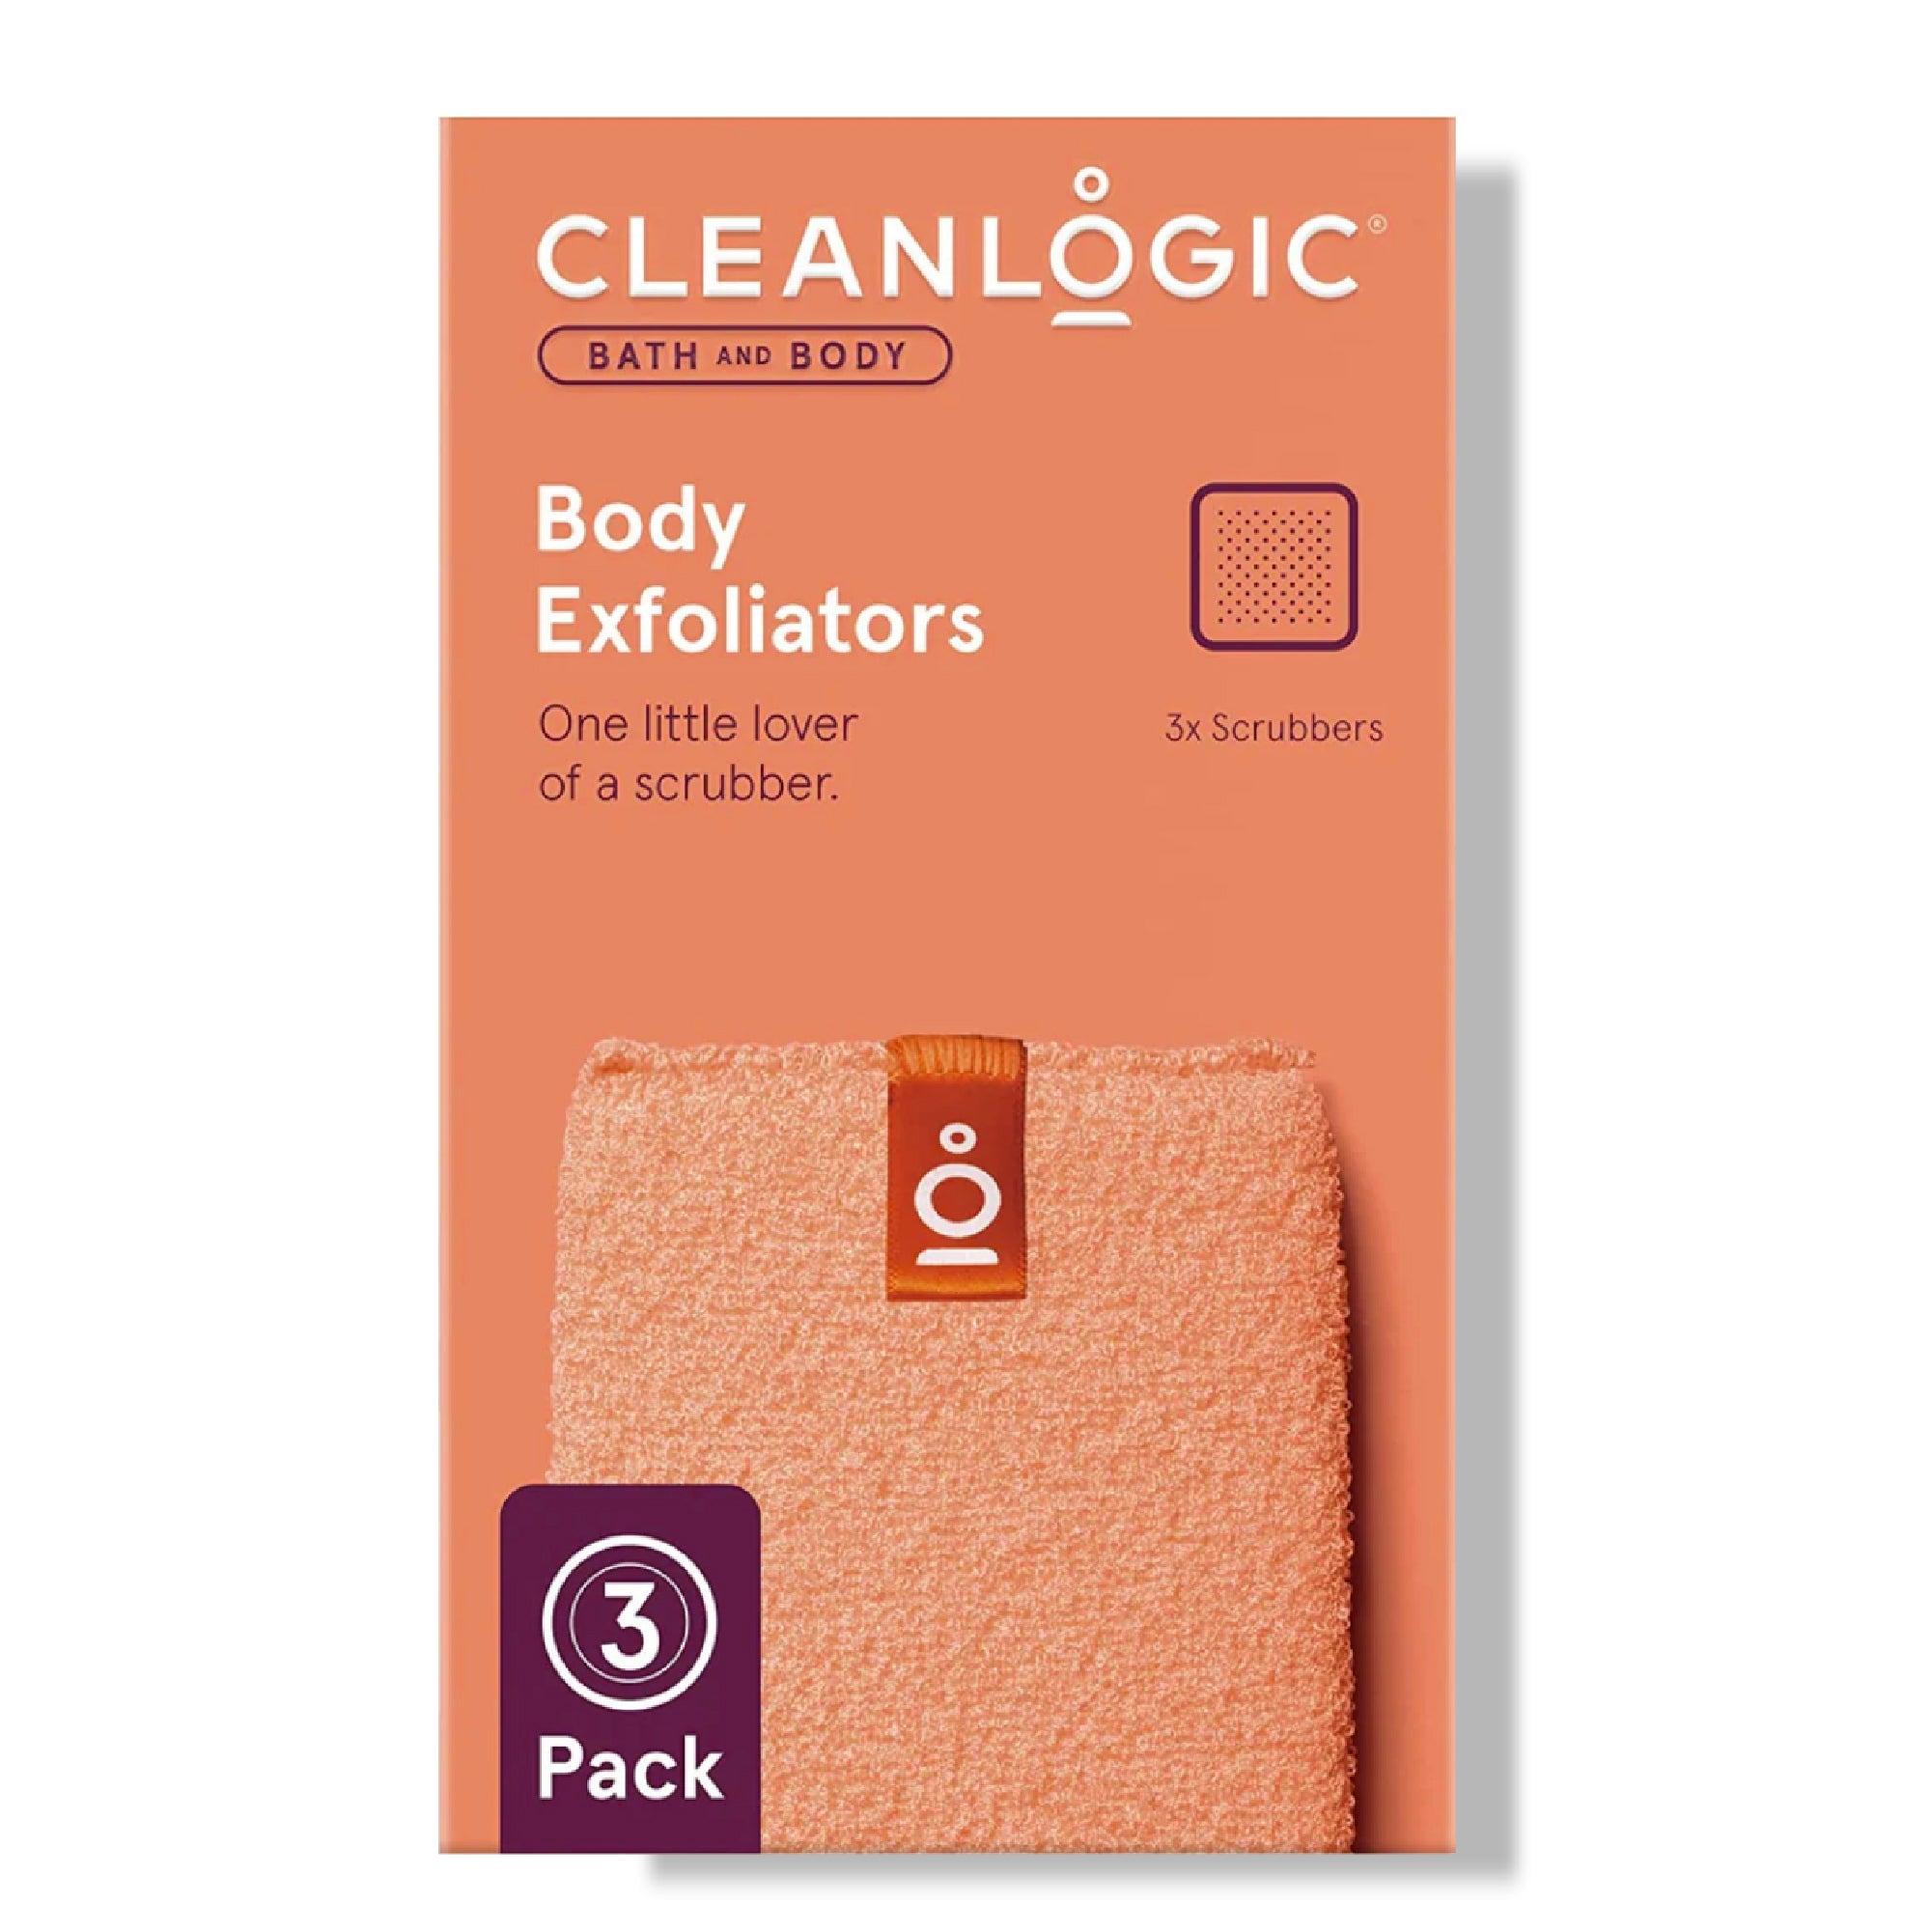 Bath and Body Body Exfoliators, Assorted Colors, 3 Count